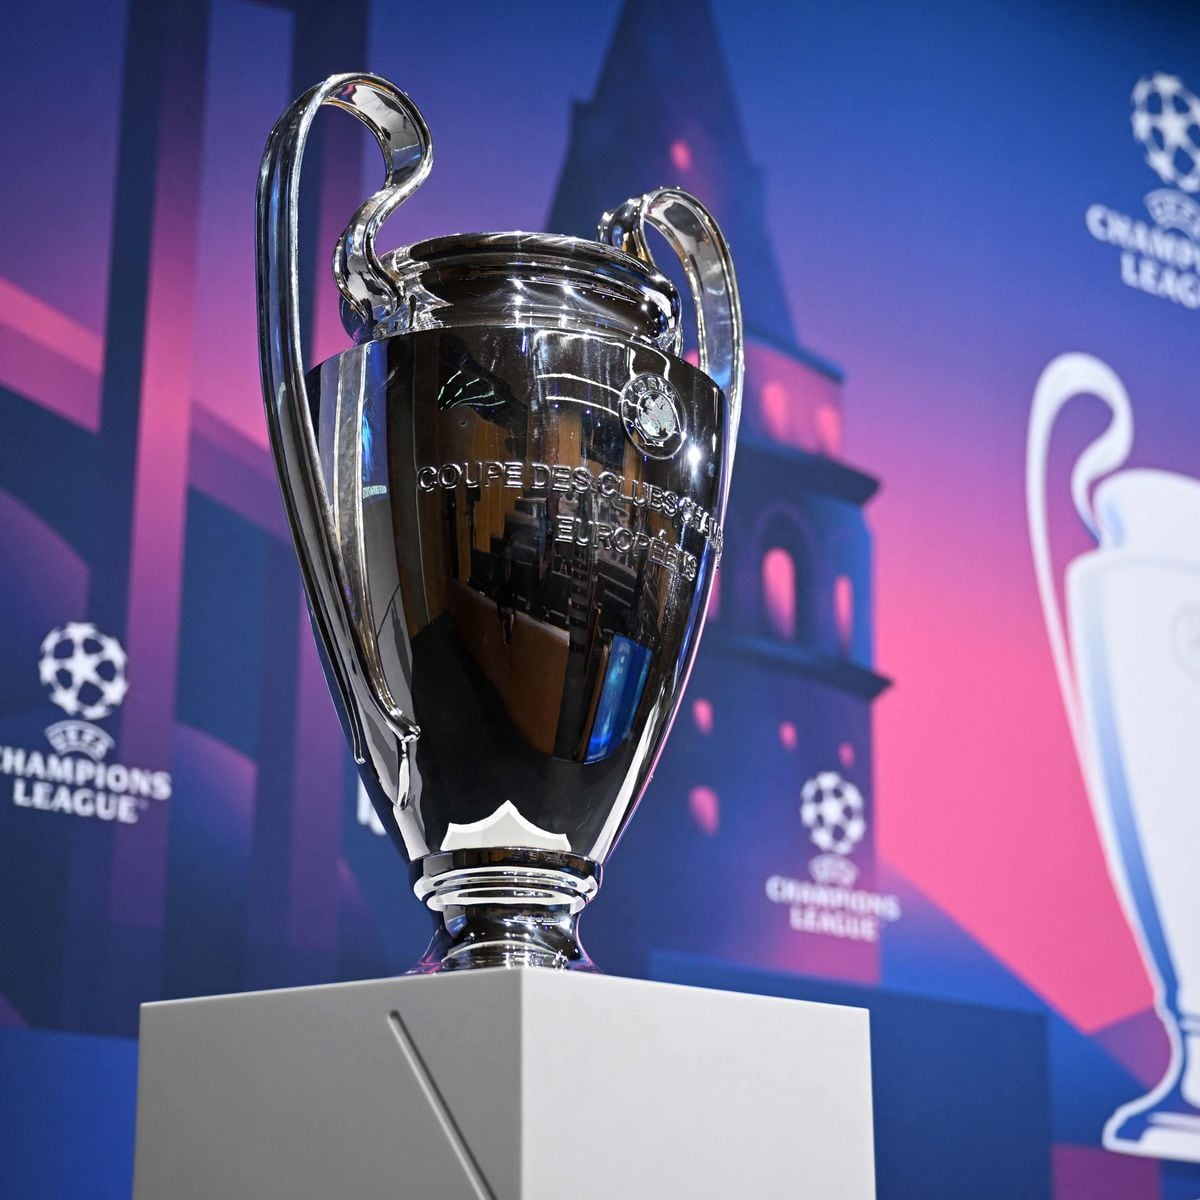 Champions League 2023/24 pots: which teams can Real Madrid play against? -  AS USA